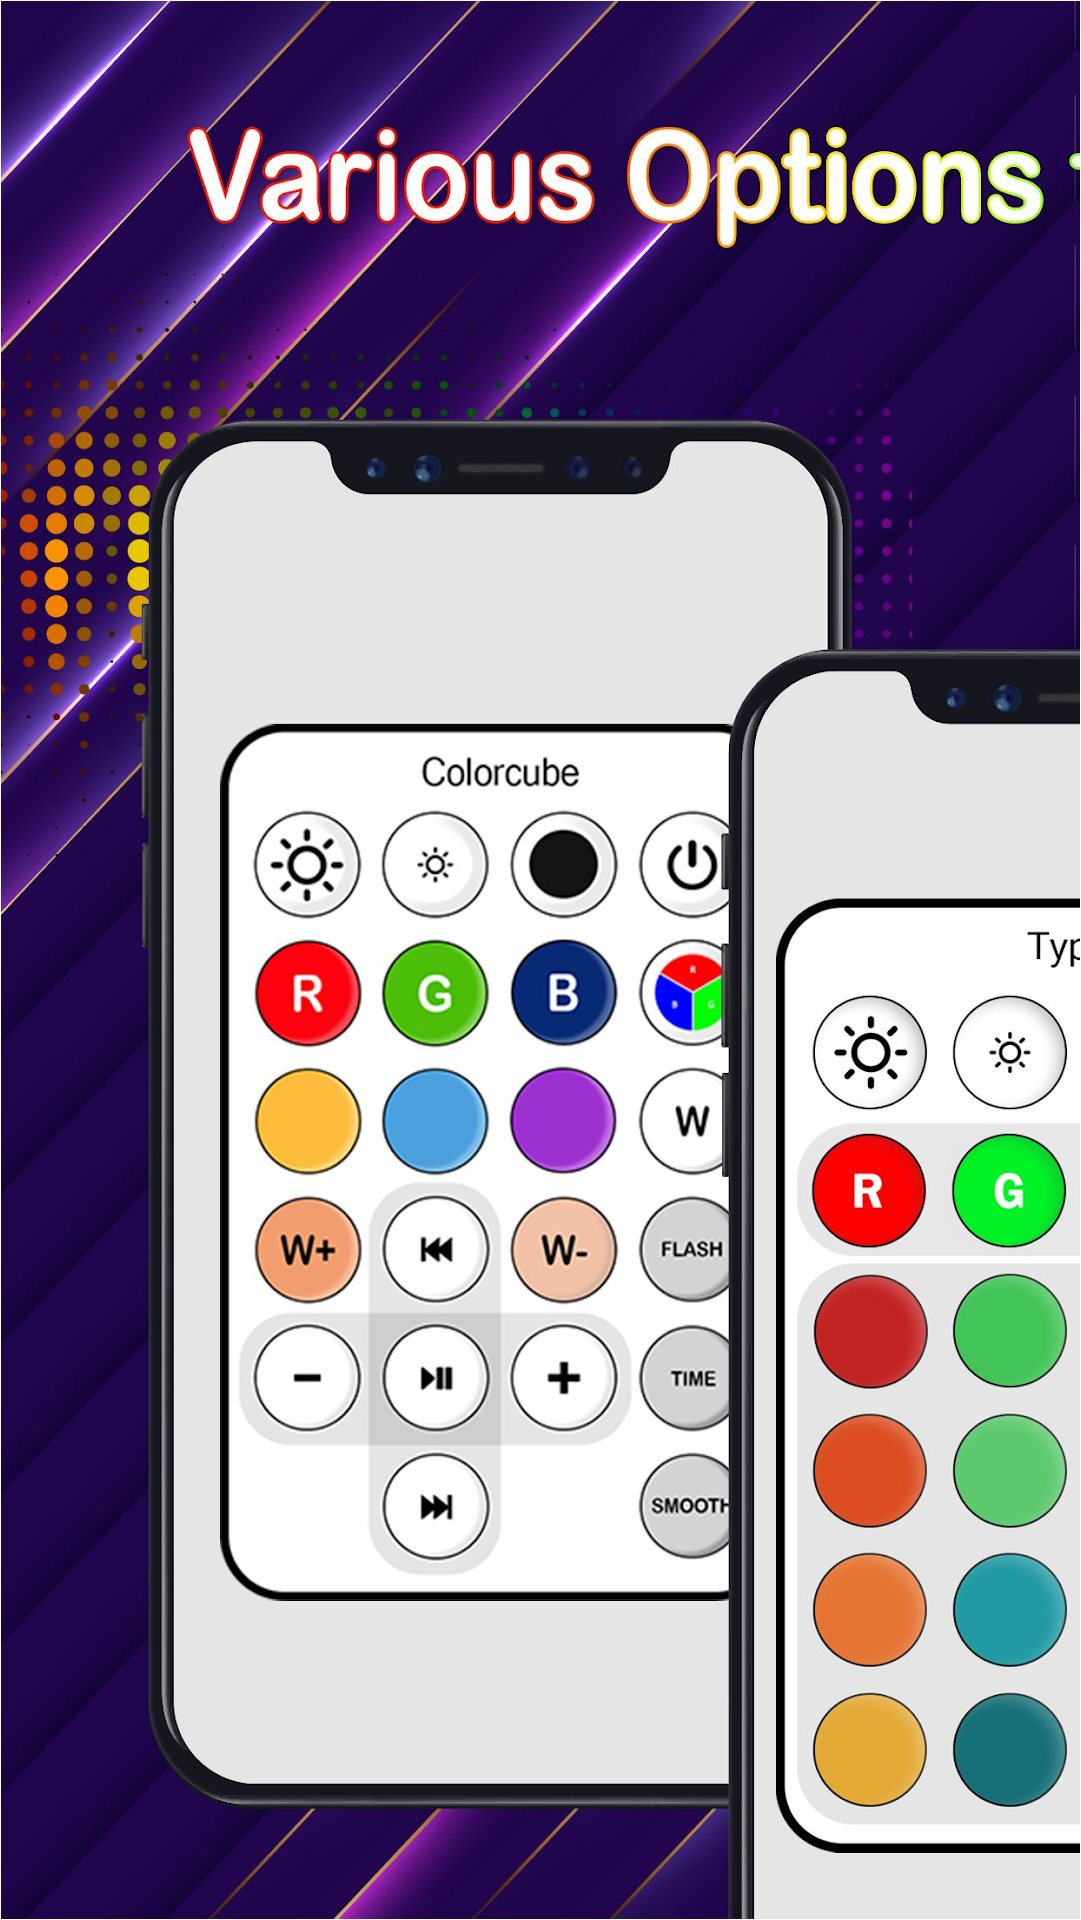 LED Light Controller & Remote APK for Android Download